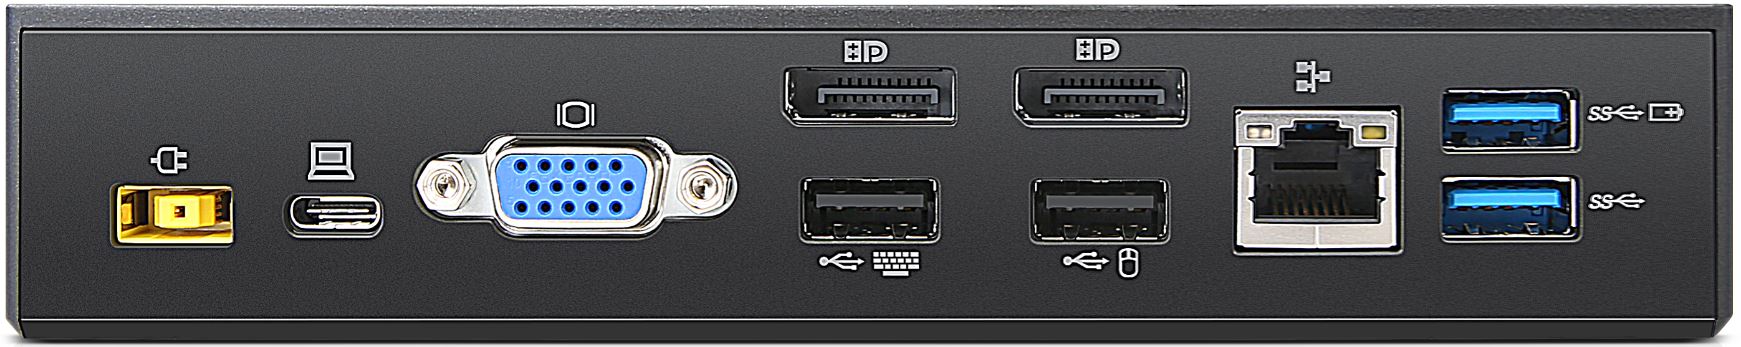 ThinkPad USB-C Dock - Overview and Service Parts - Lenovo Support CA